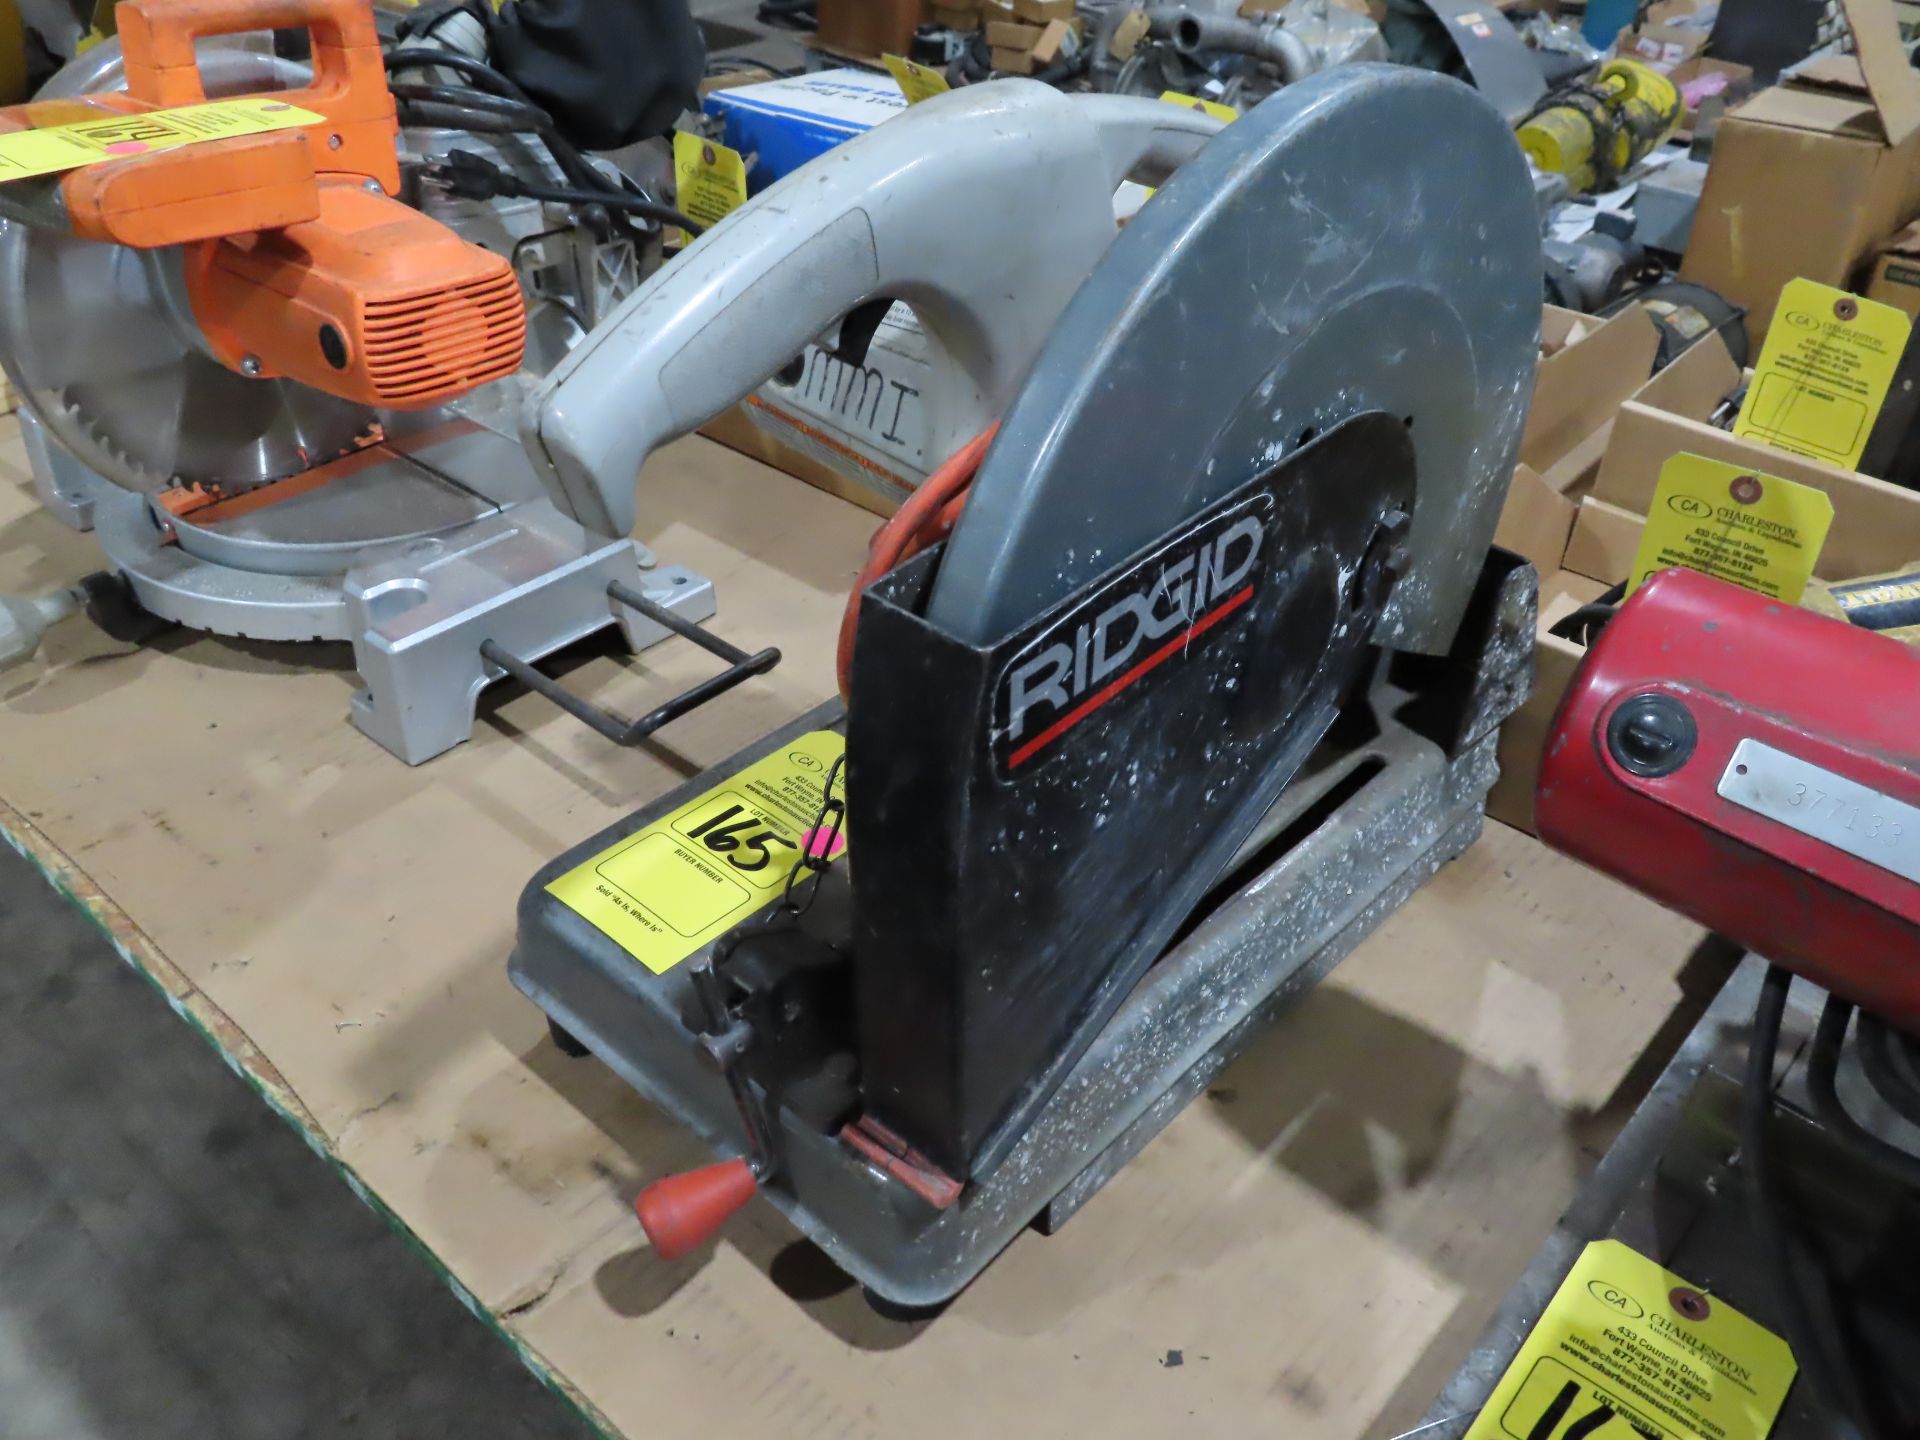 Ridgid abrasive saw, used, as always with Brolyn LLC auctions, all lots can be picked up from